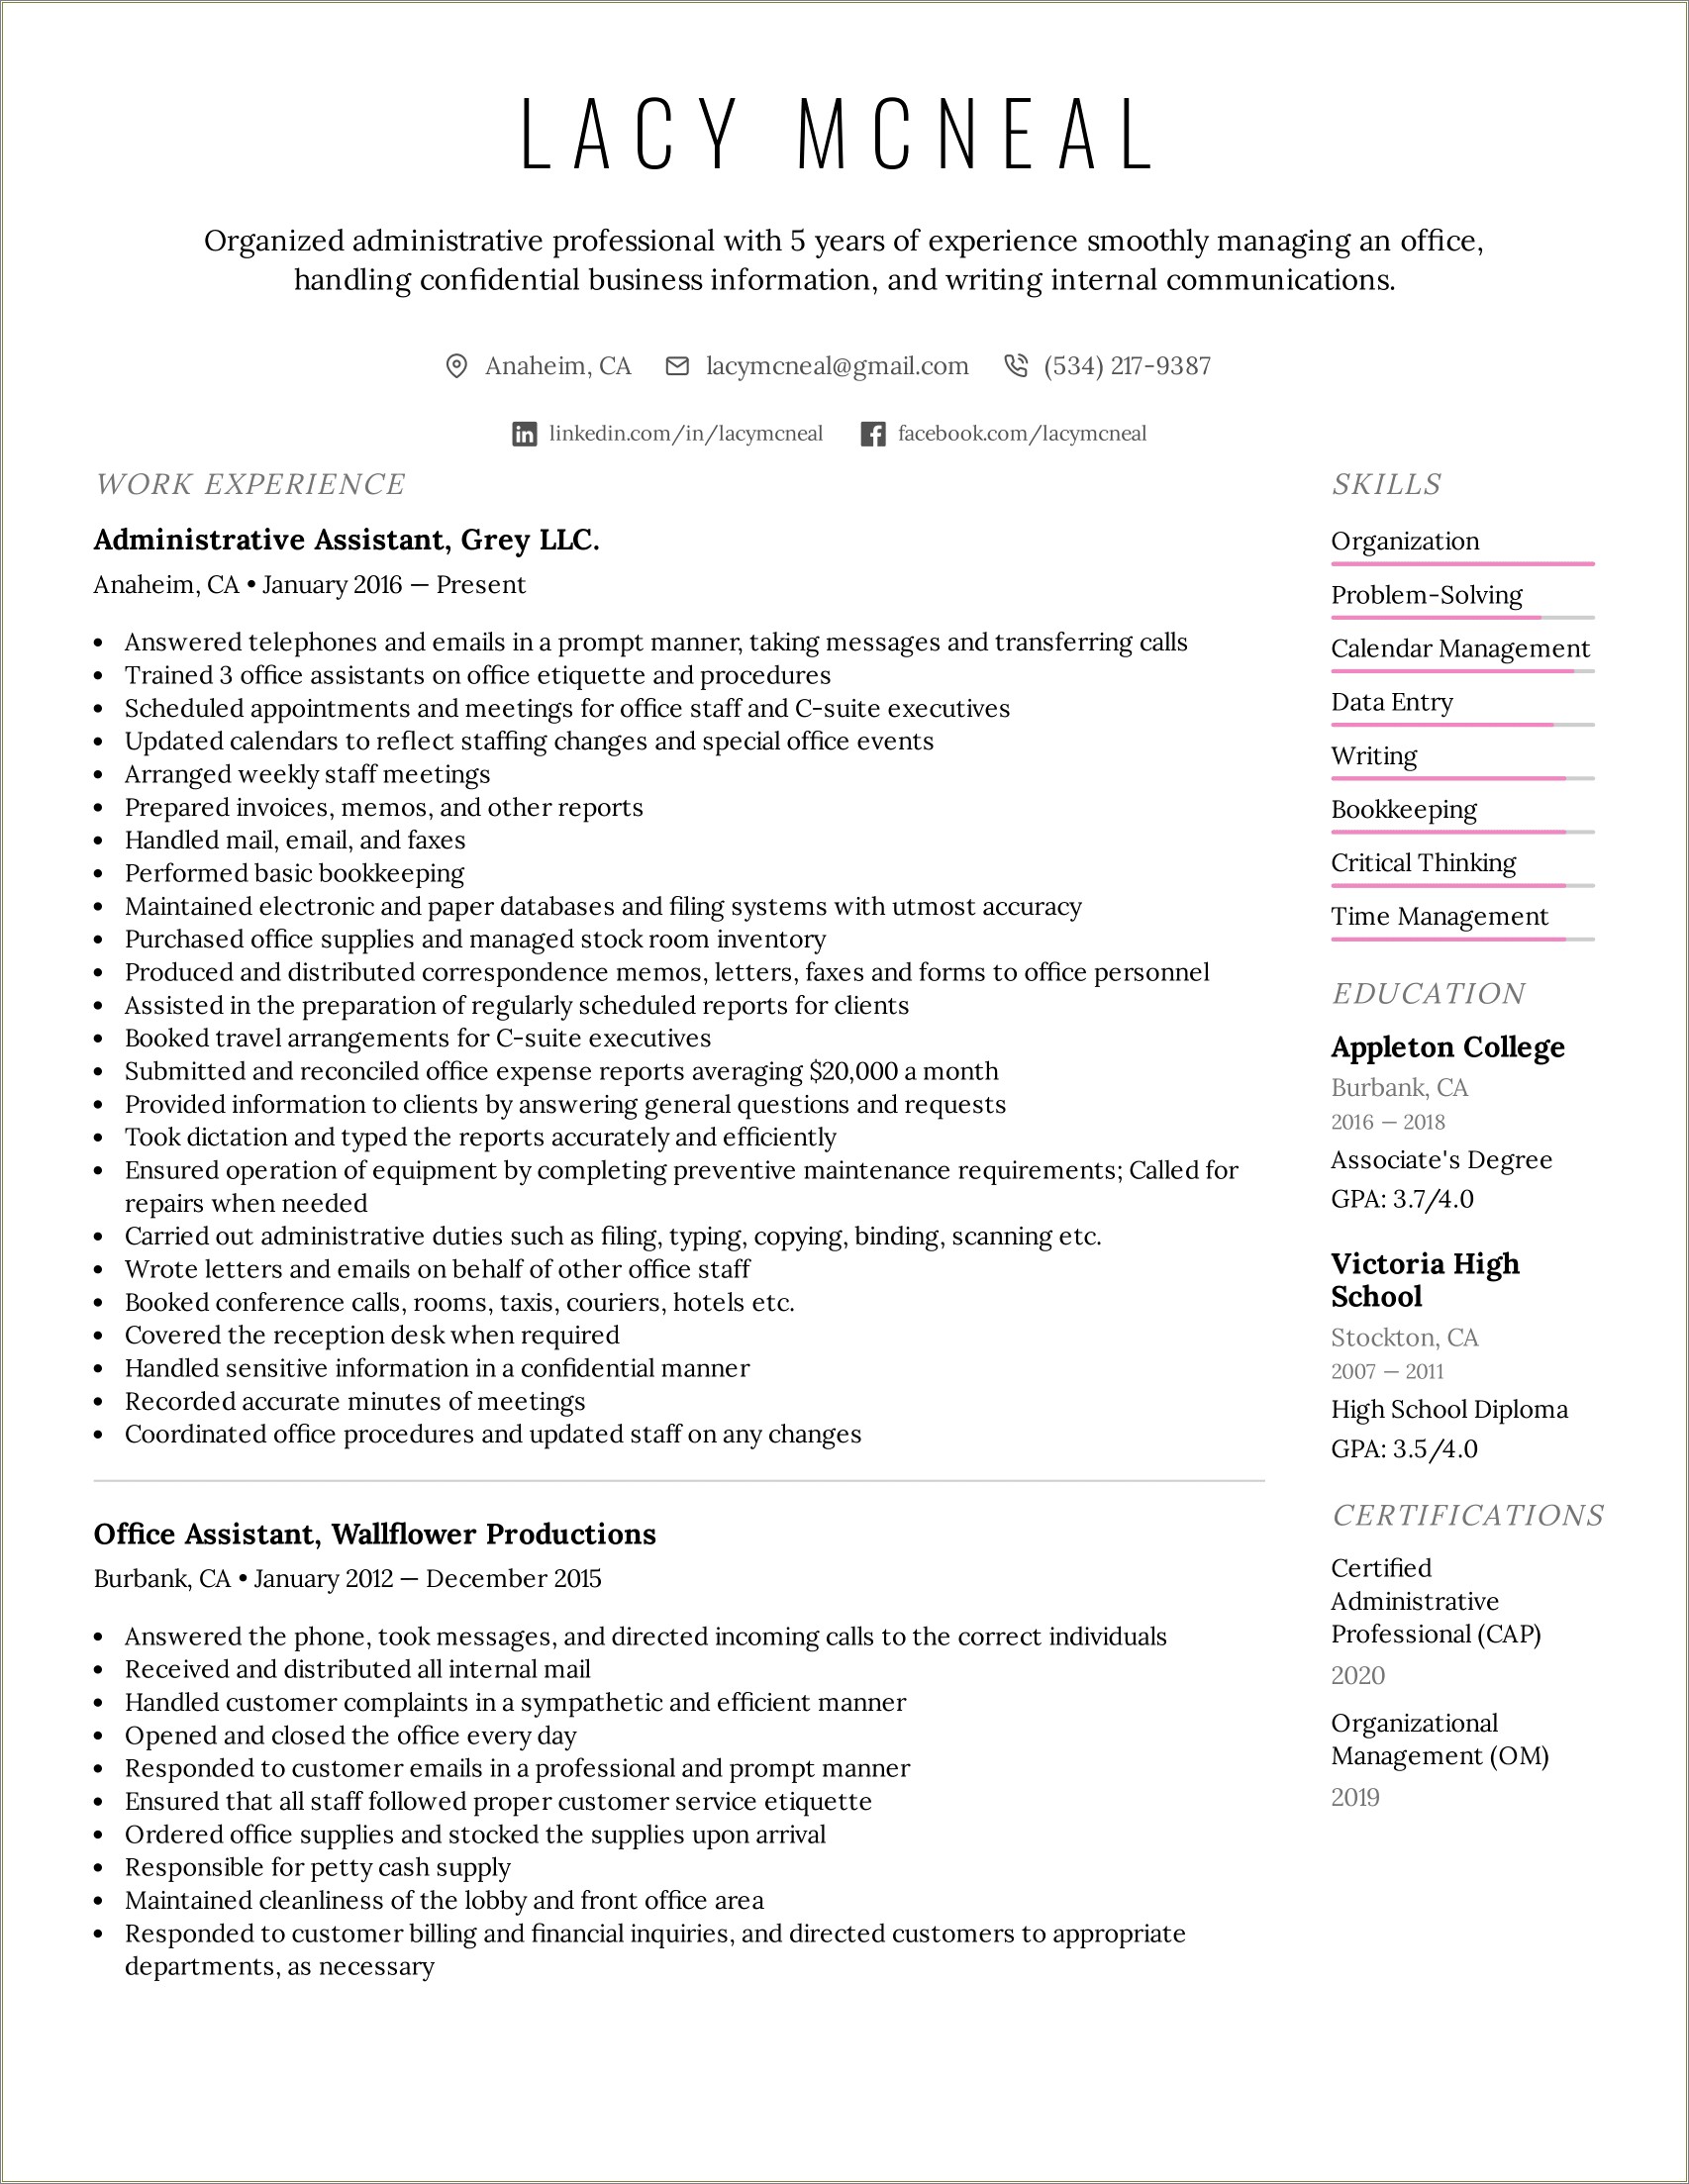 Resume Career Summary For Administrative Assistant